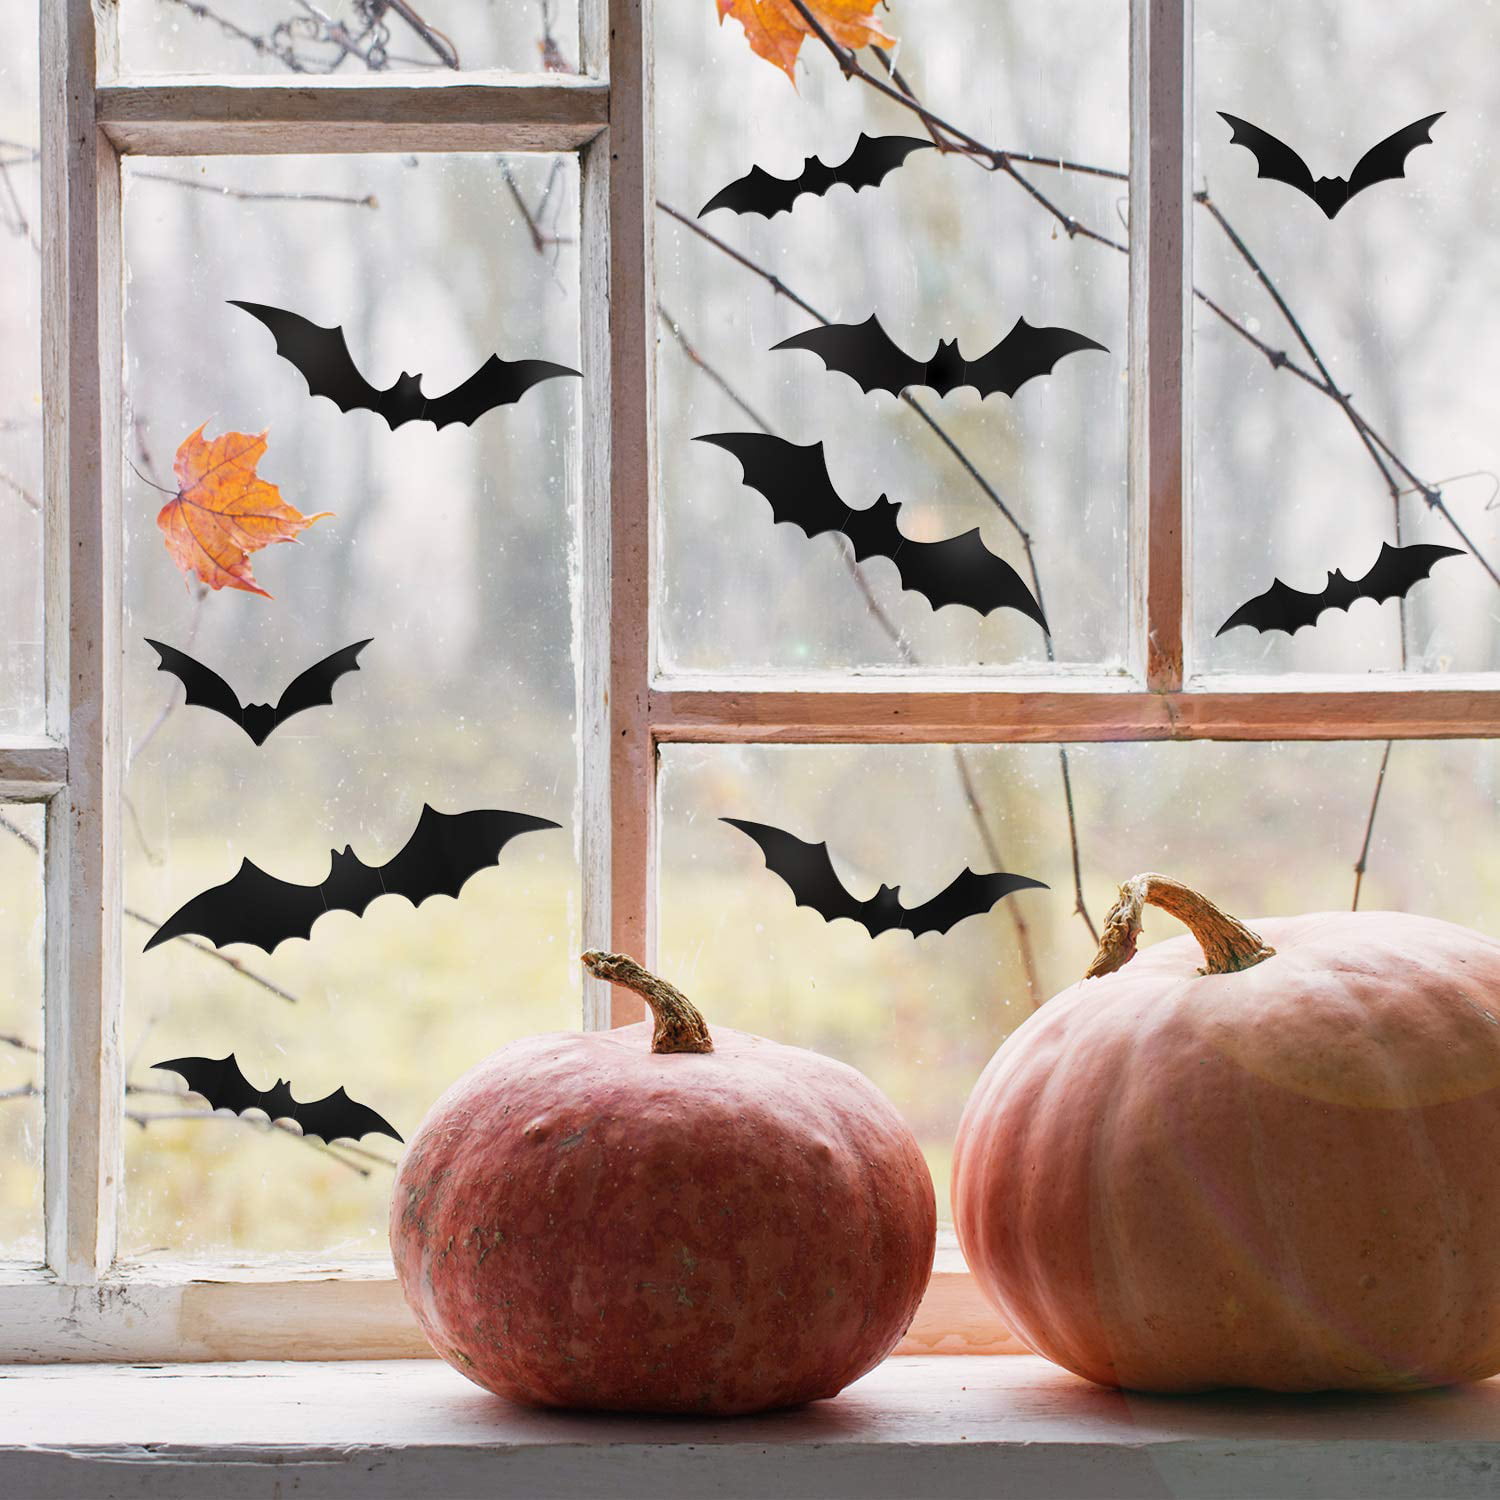 NUOBESTY Bat Wall Decals PVC 3D Bats Removable Decals Stickers Window Decors Halloween Party Supplies,48pcs,Black